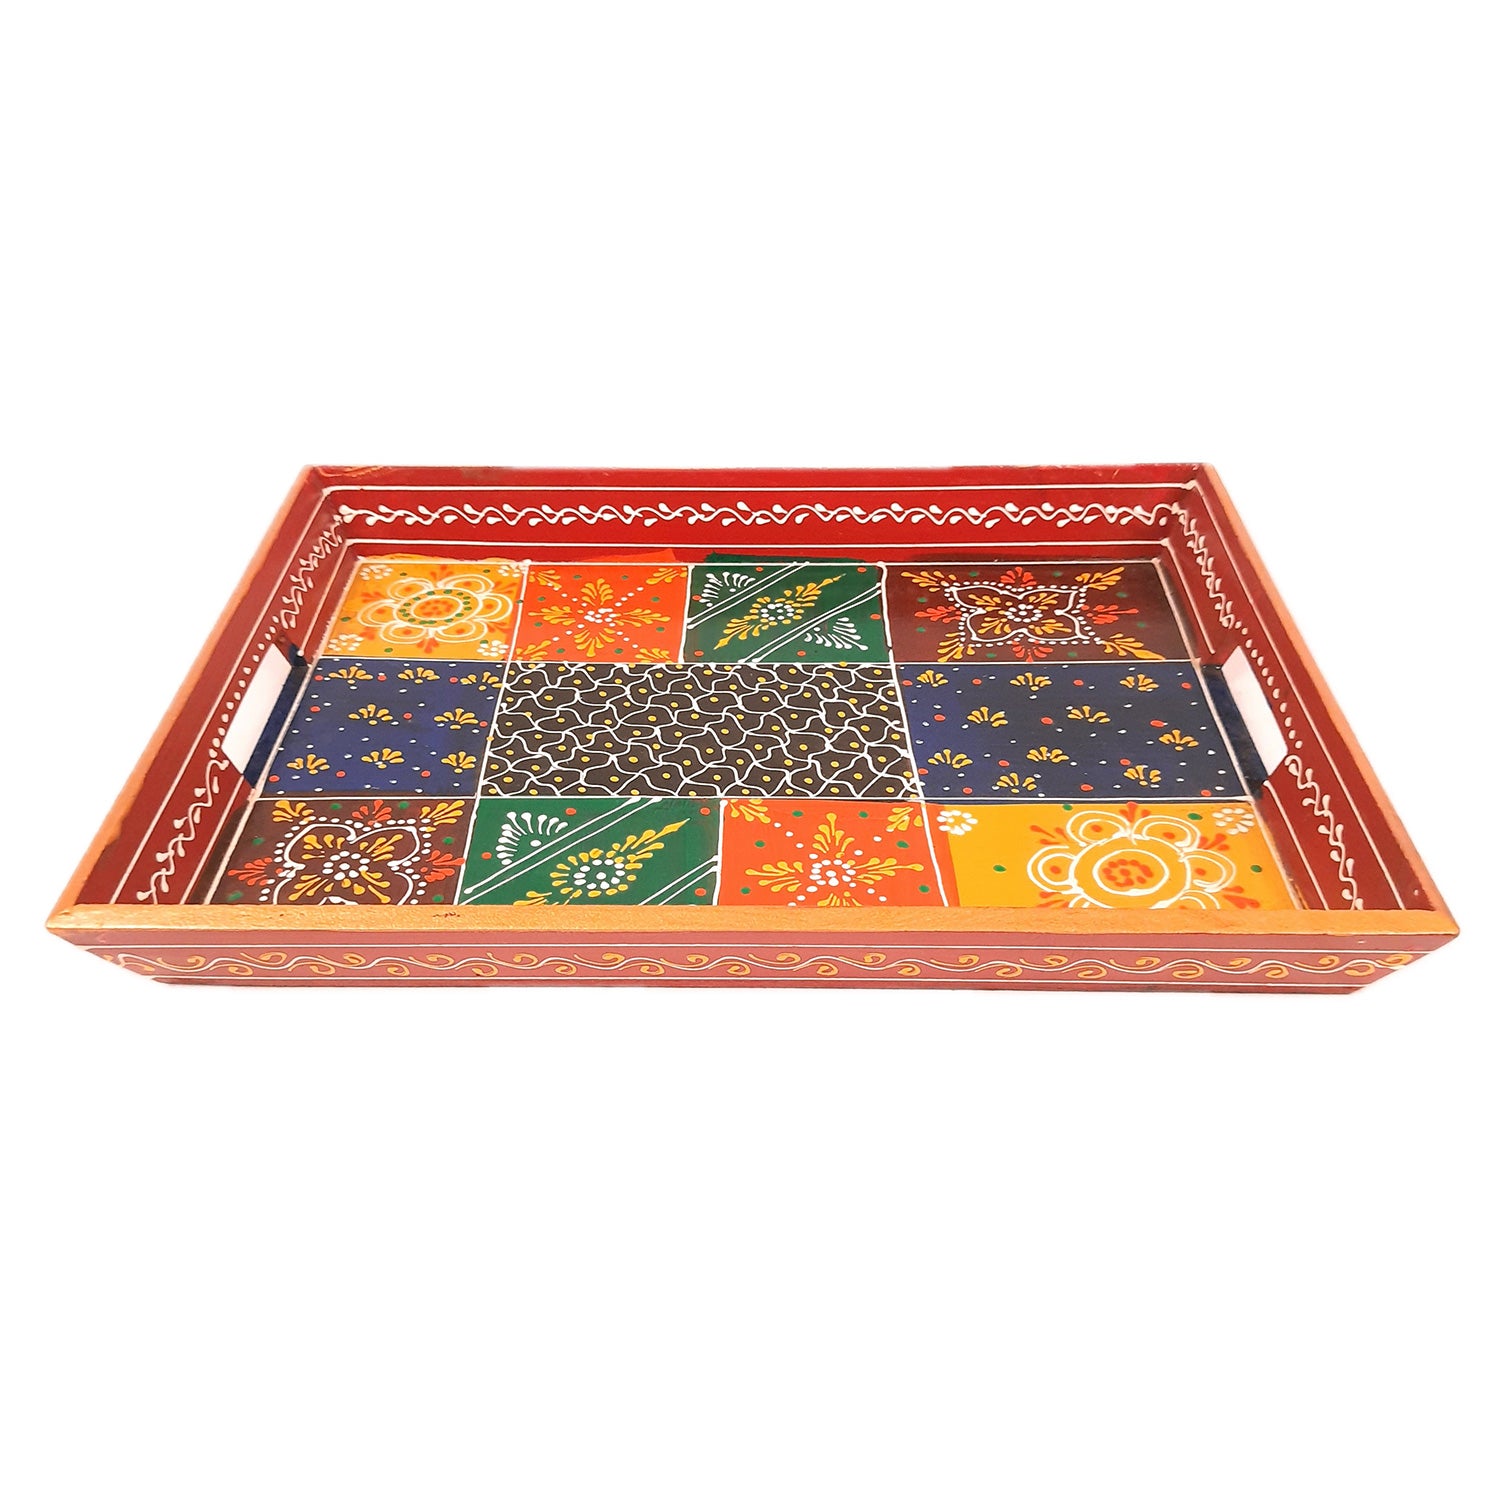 Wooden Tray Set | Serving Trays & Platters for Tea, Coffee & Snacks | Multipurpose Decorative Trays - for Home, Dining Table Organization, Kitchen & Gifts (Pack of 3) - Apkamart